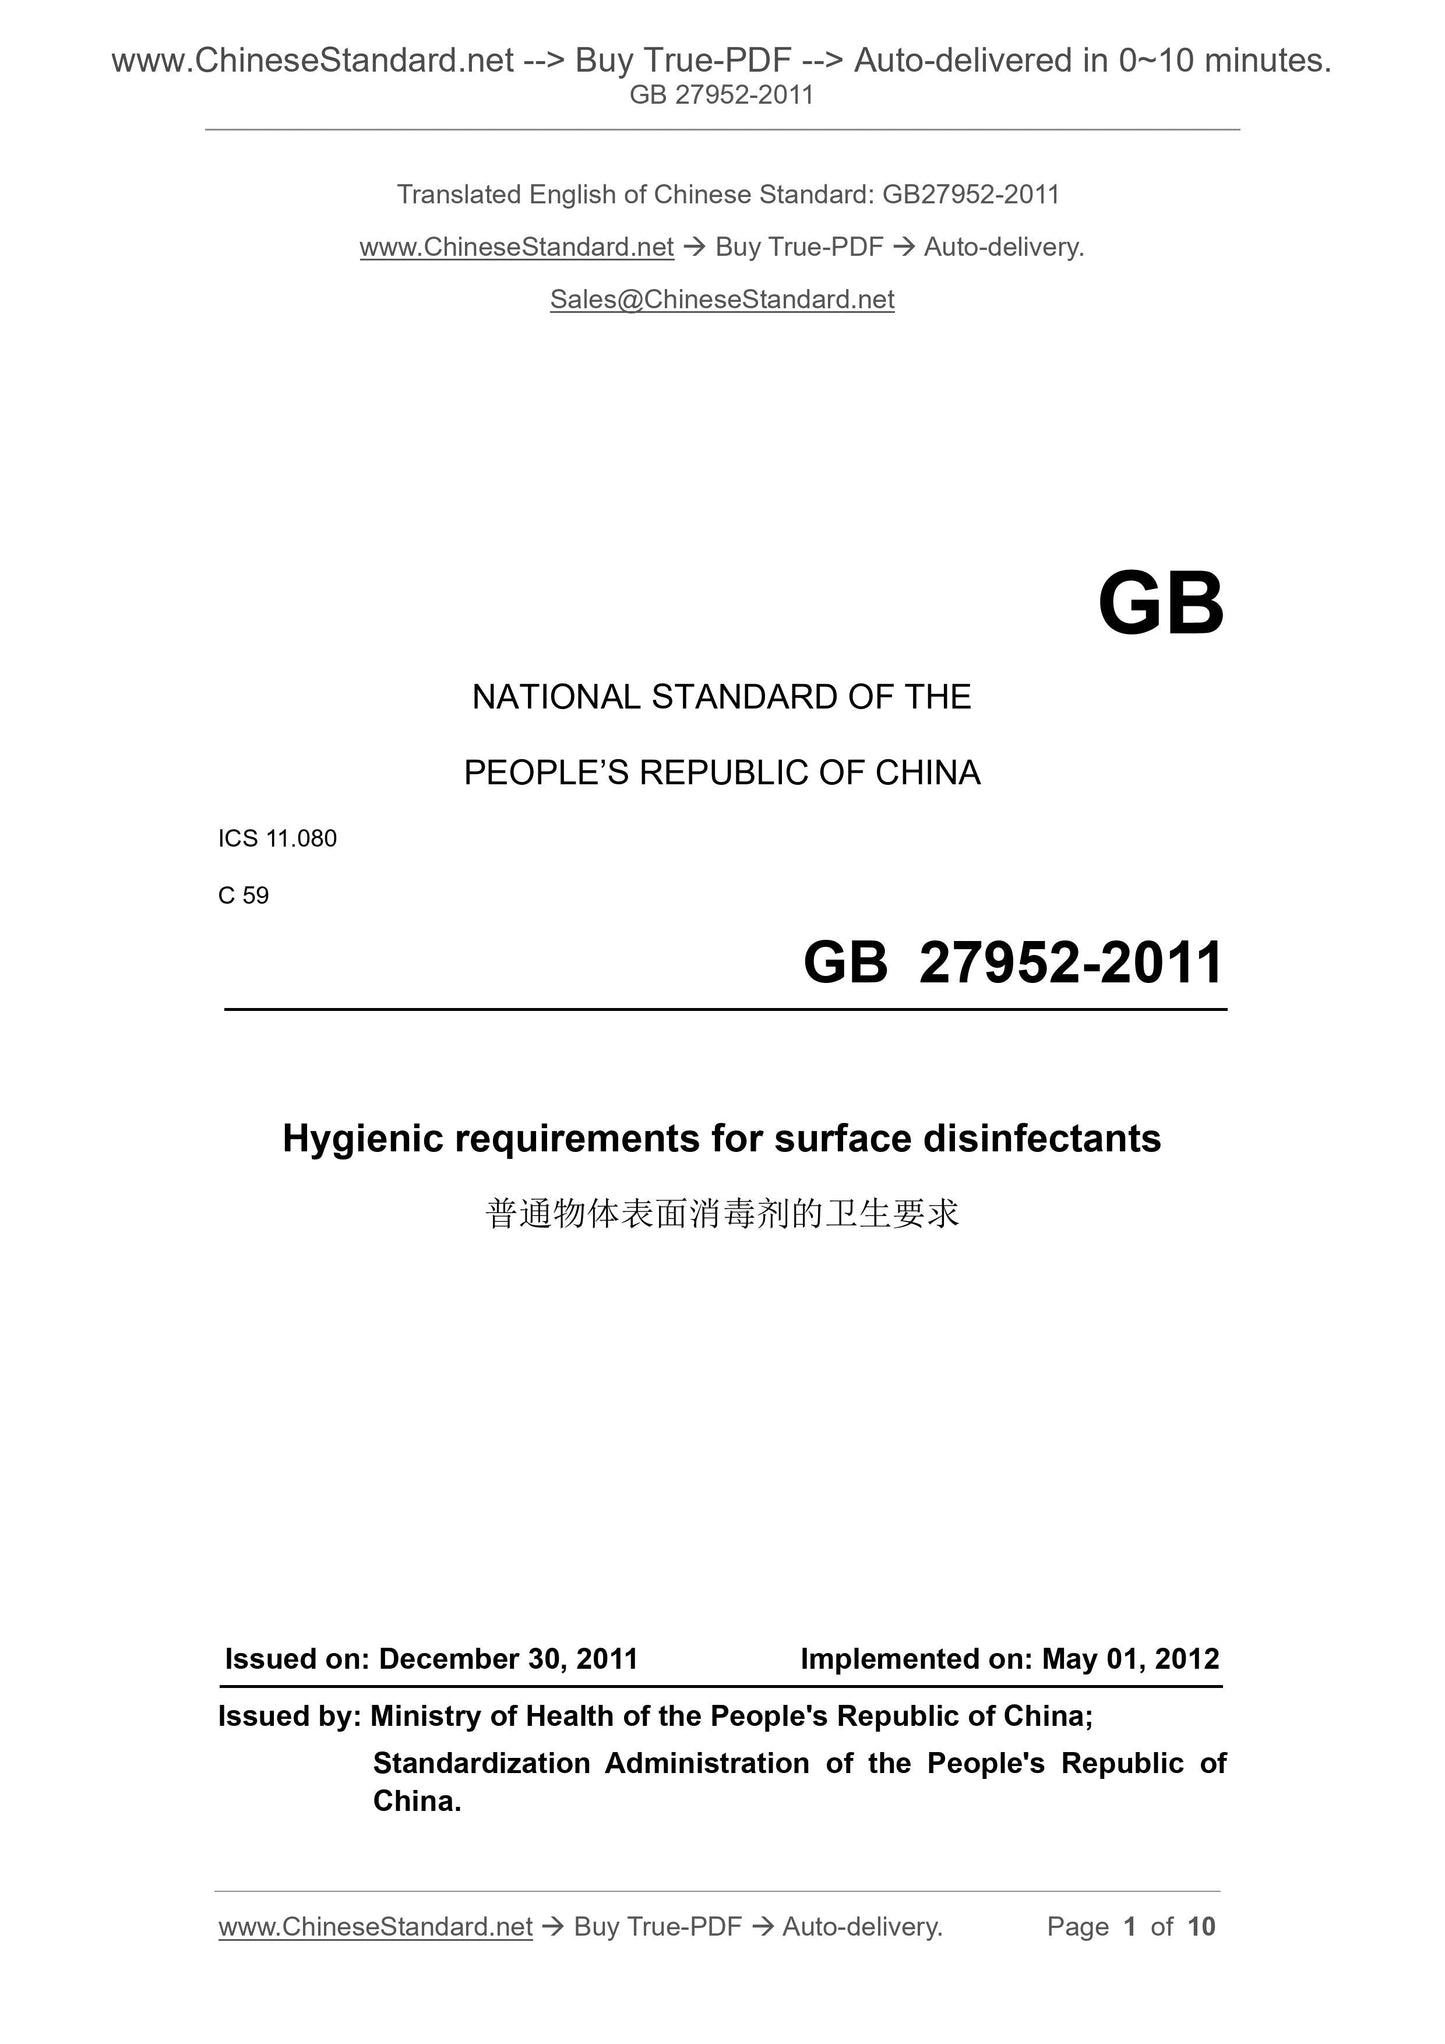 GB 27952-2011 Page 1